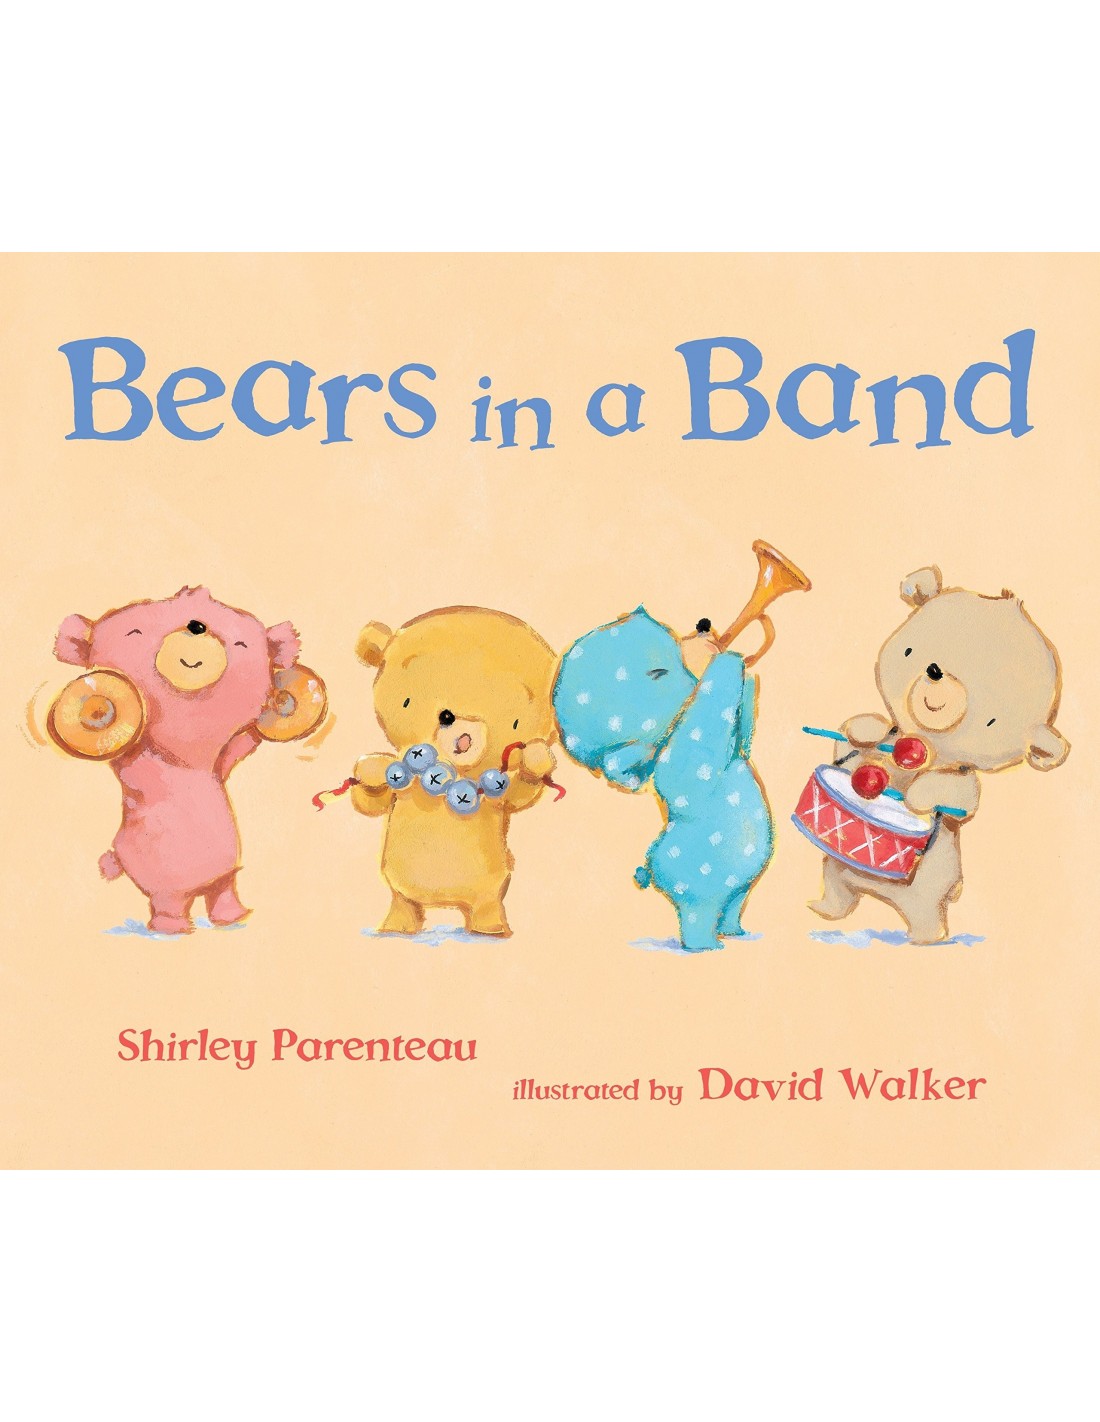 Bears in a Band